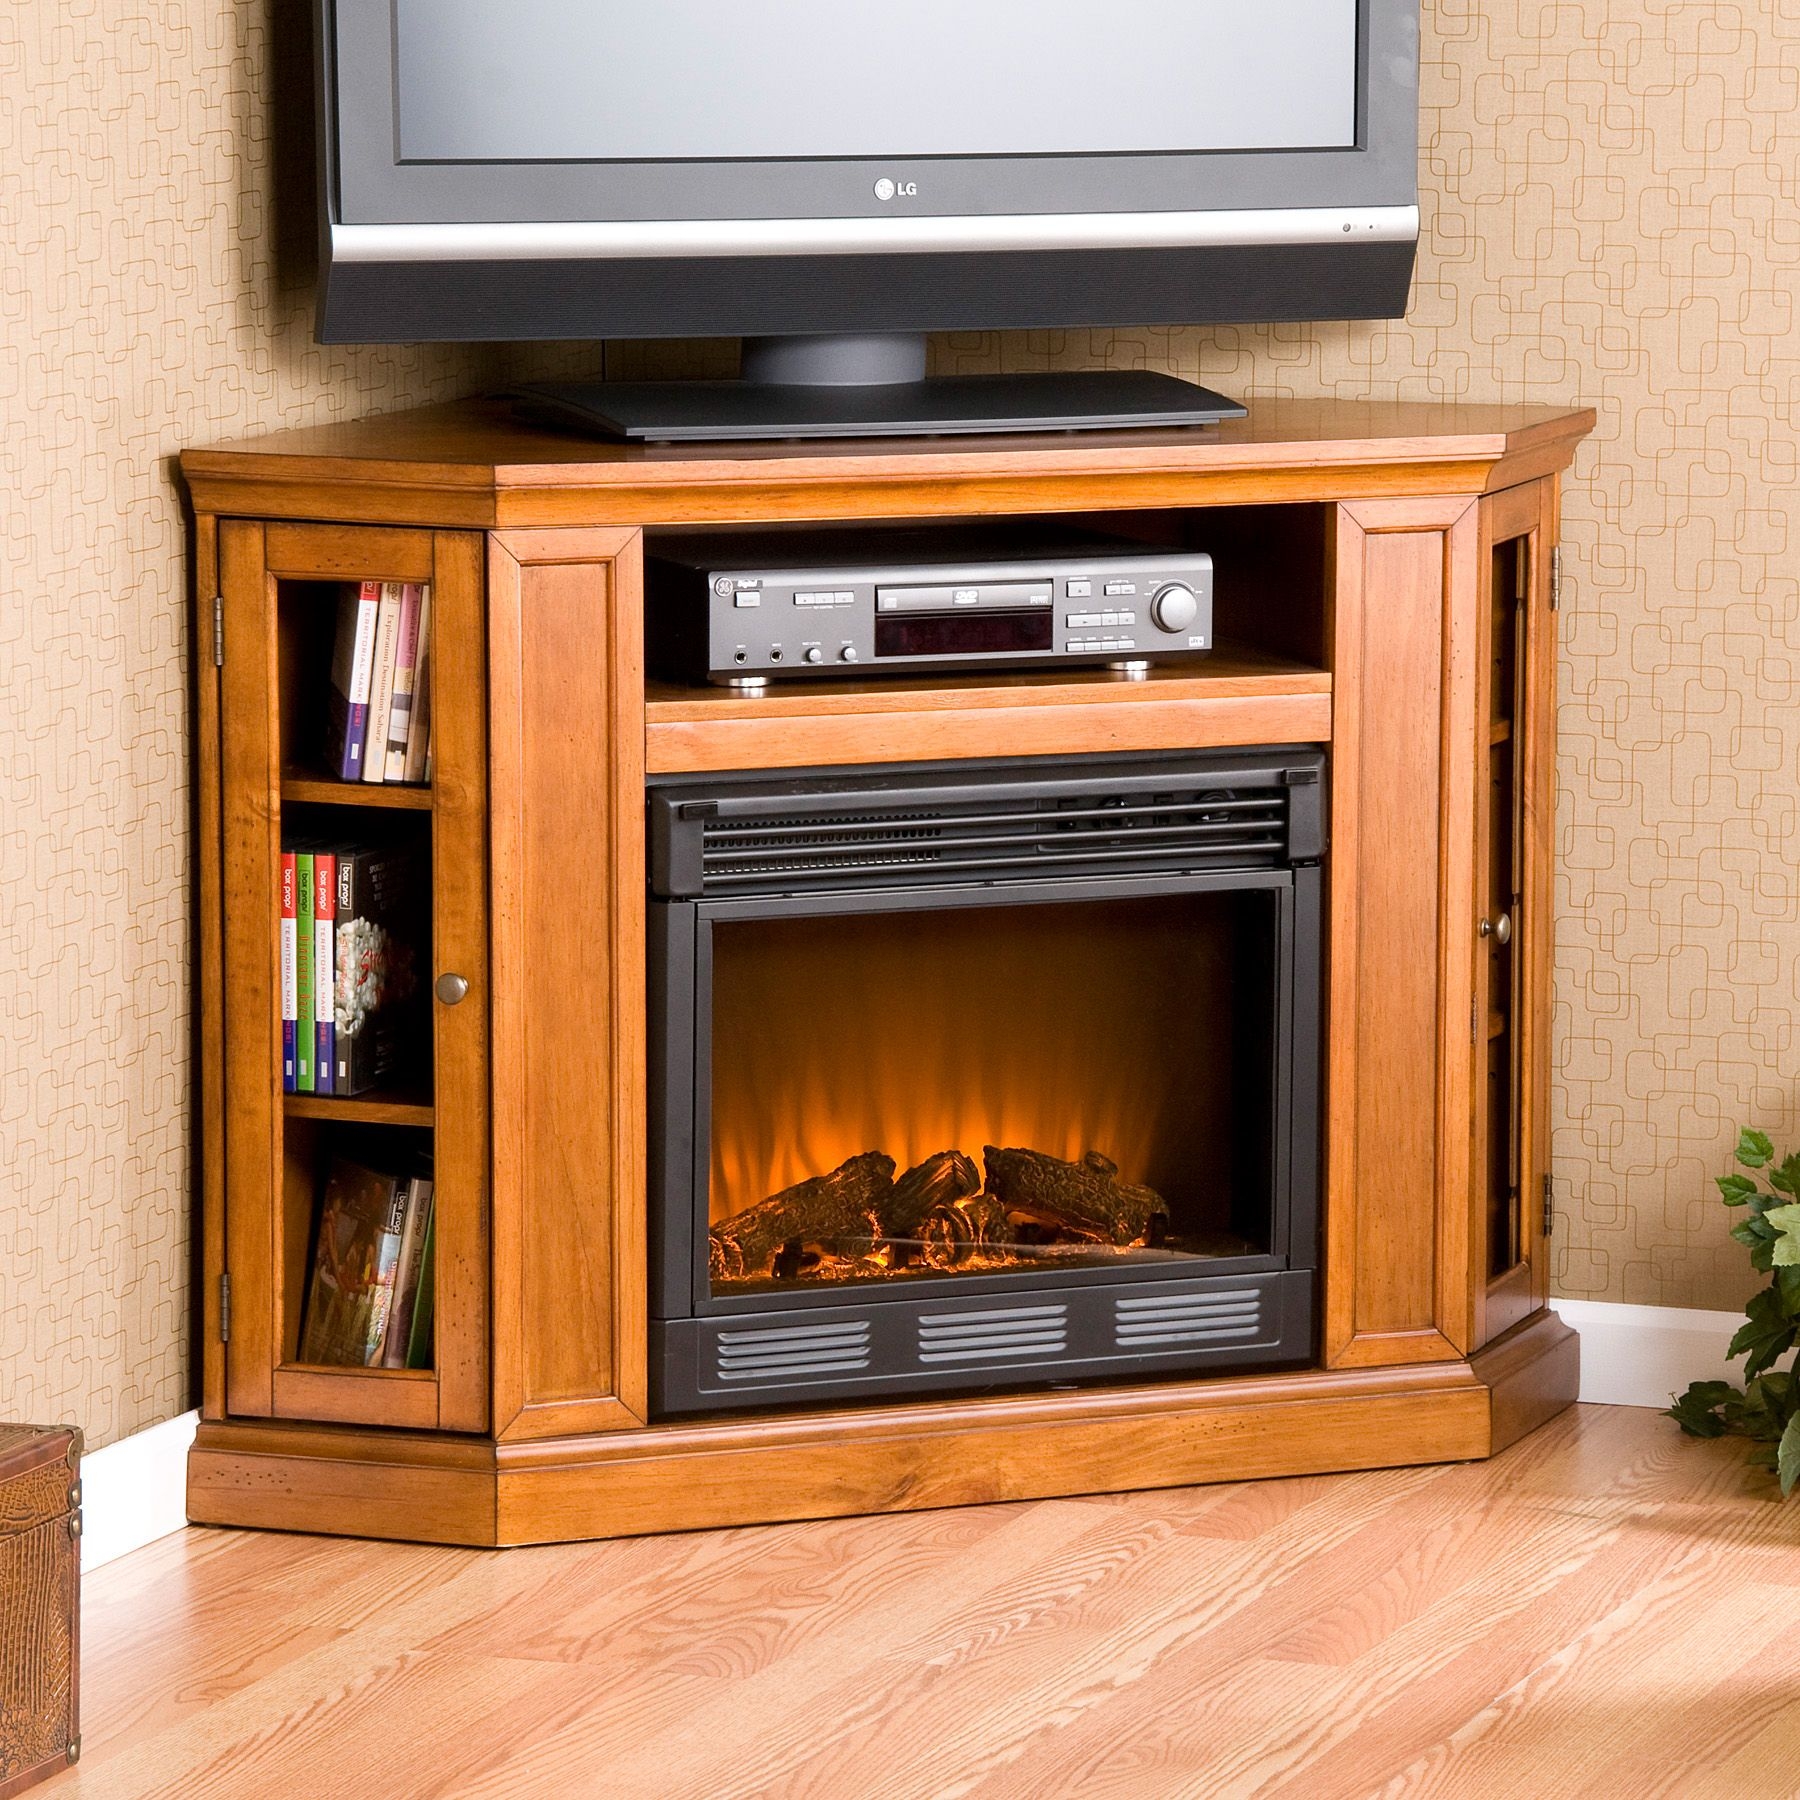 Corner Electric Fireplace Tv Stand You, Corner Gel Fireplace Tv Stand